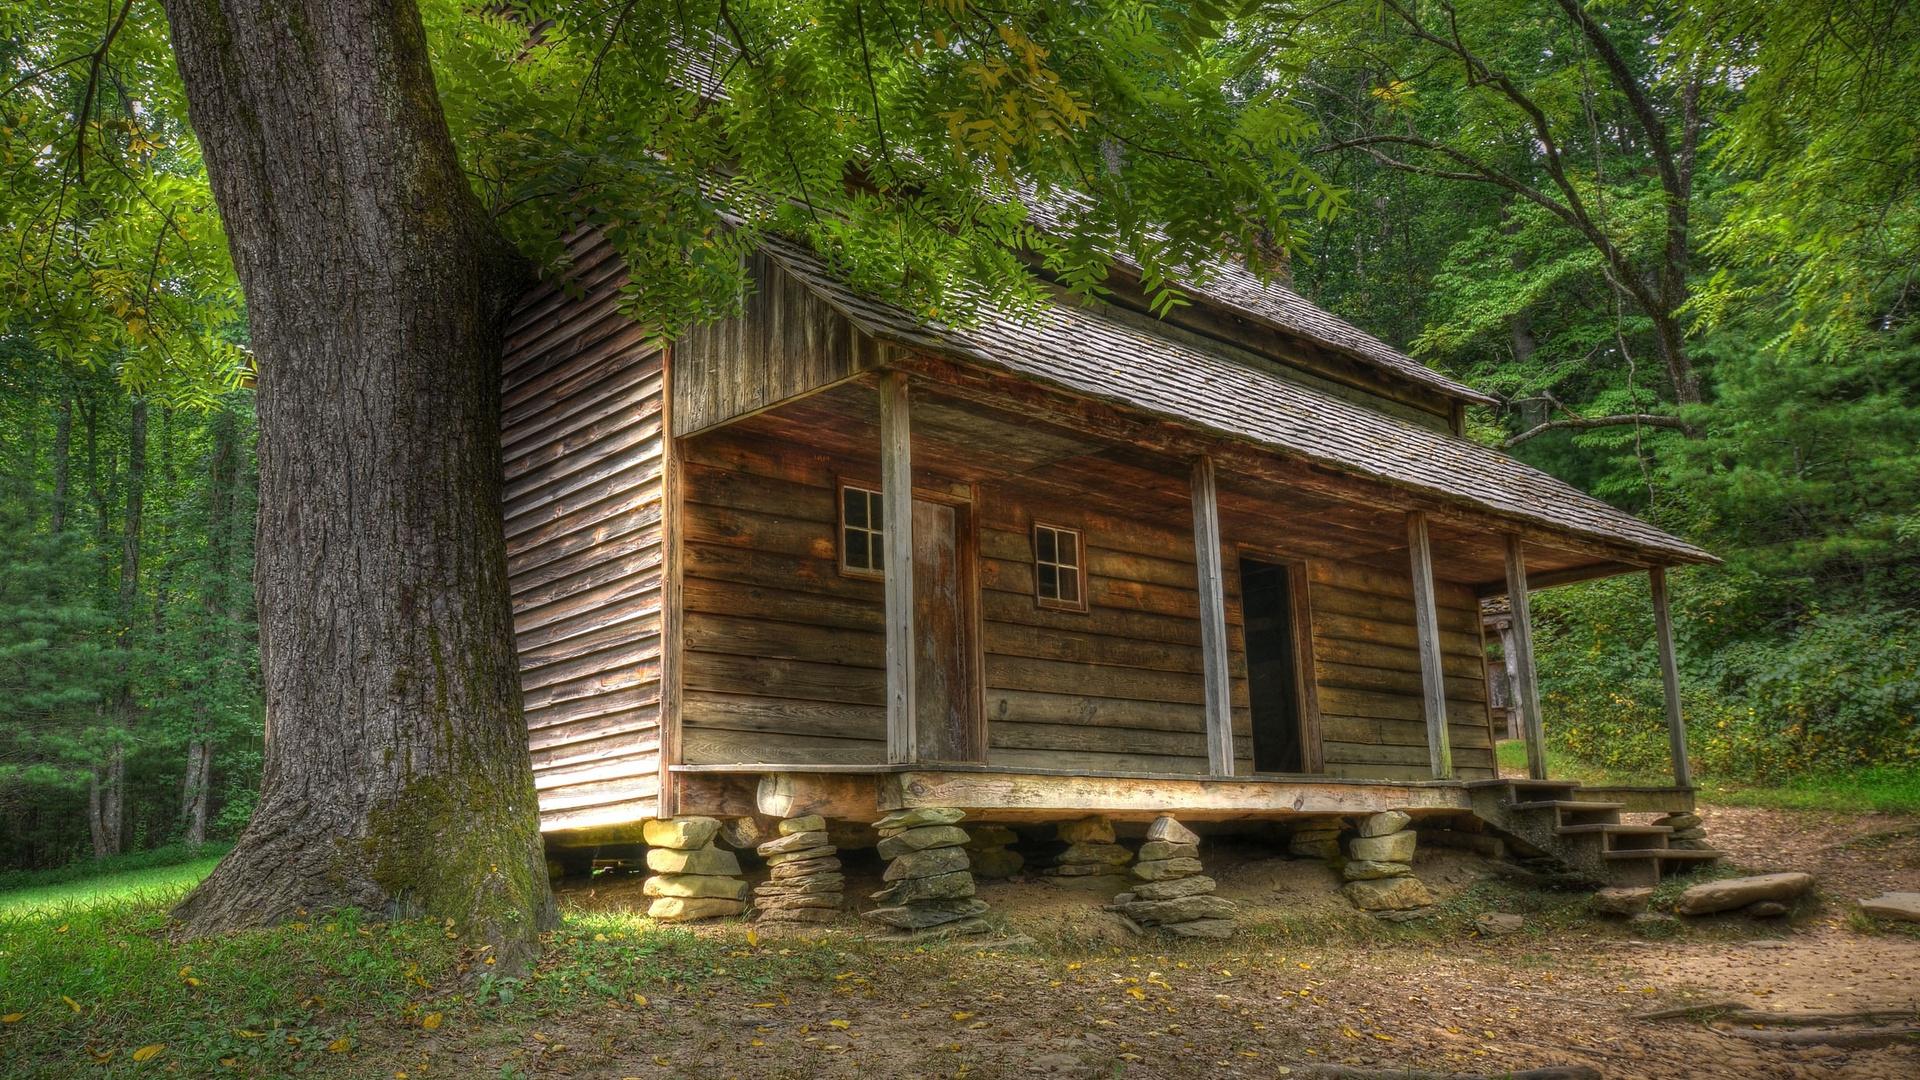 Deserted wooden cabin in the woods wallpaper | nature and landscape ...